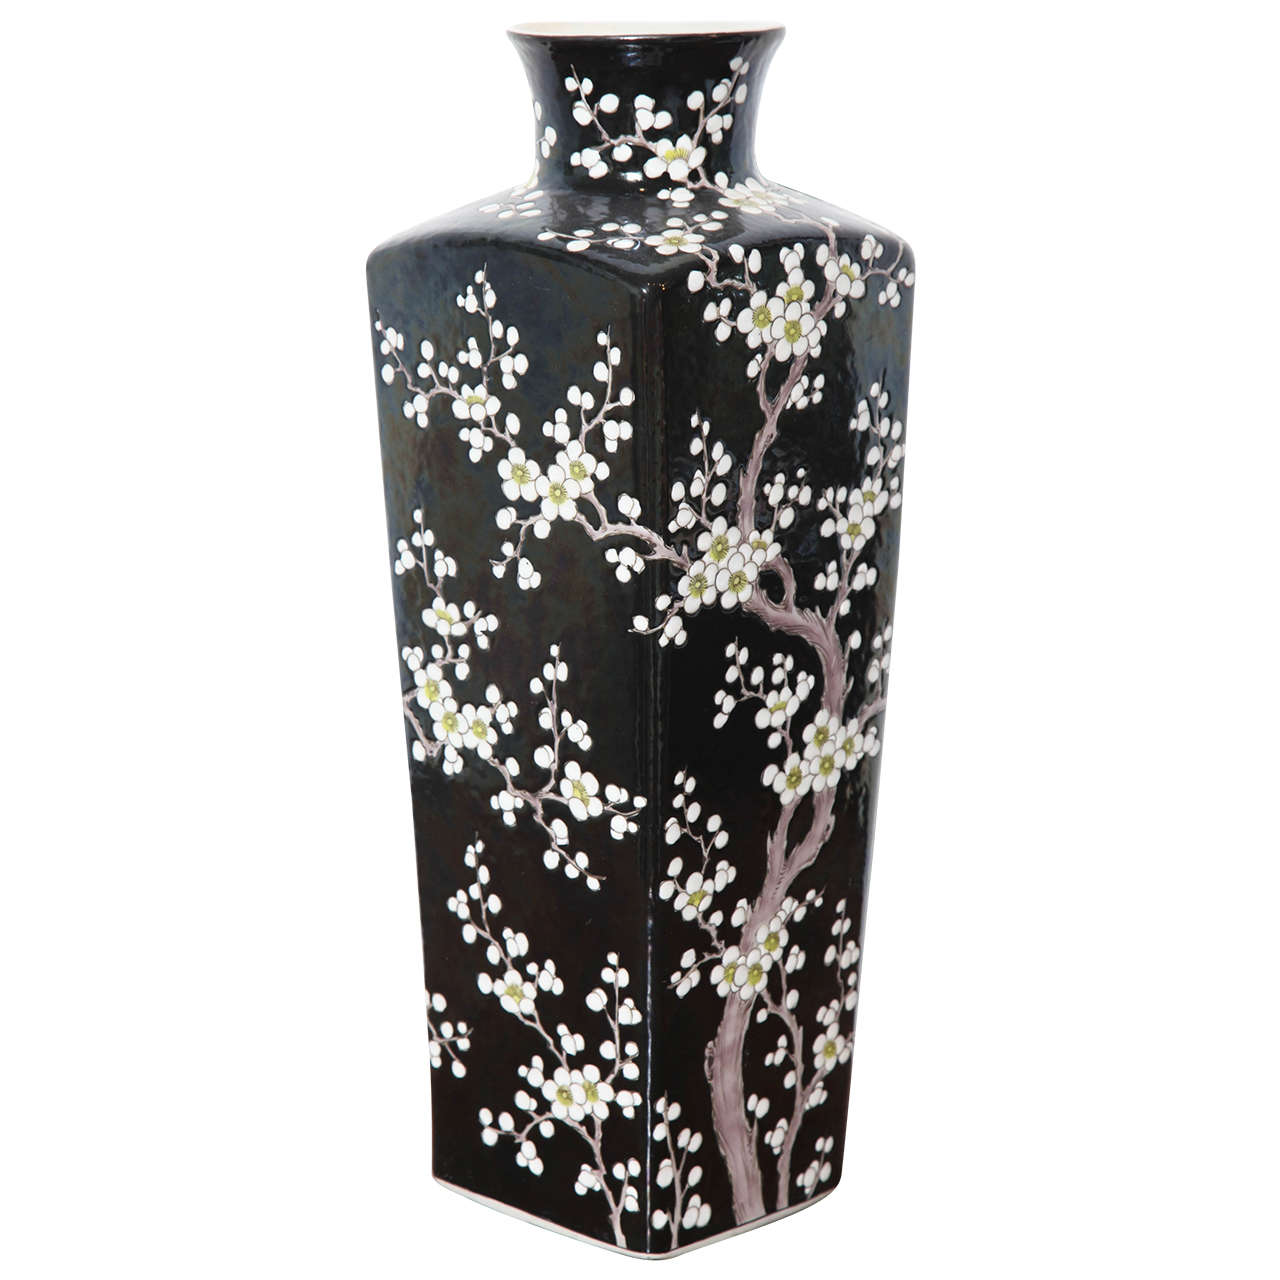 Black Glazed Chinese Vase with White Cherry Blossom Motif For Sale